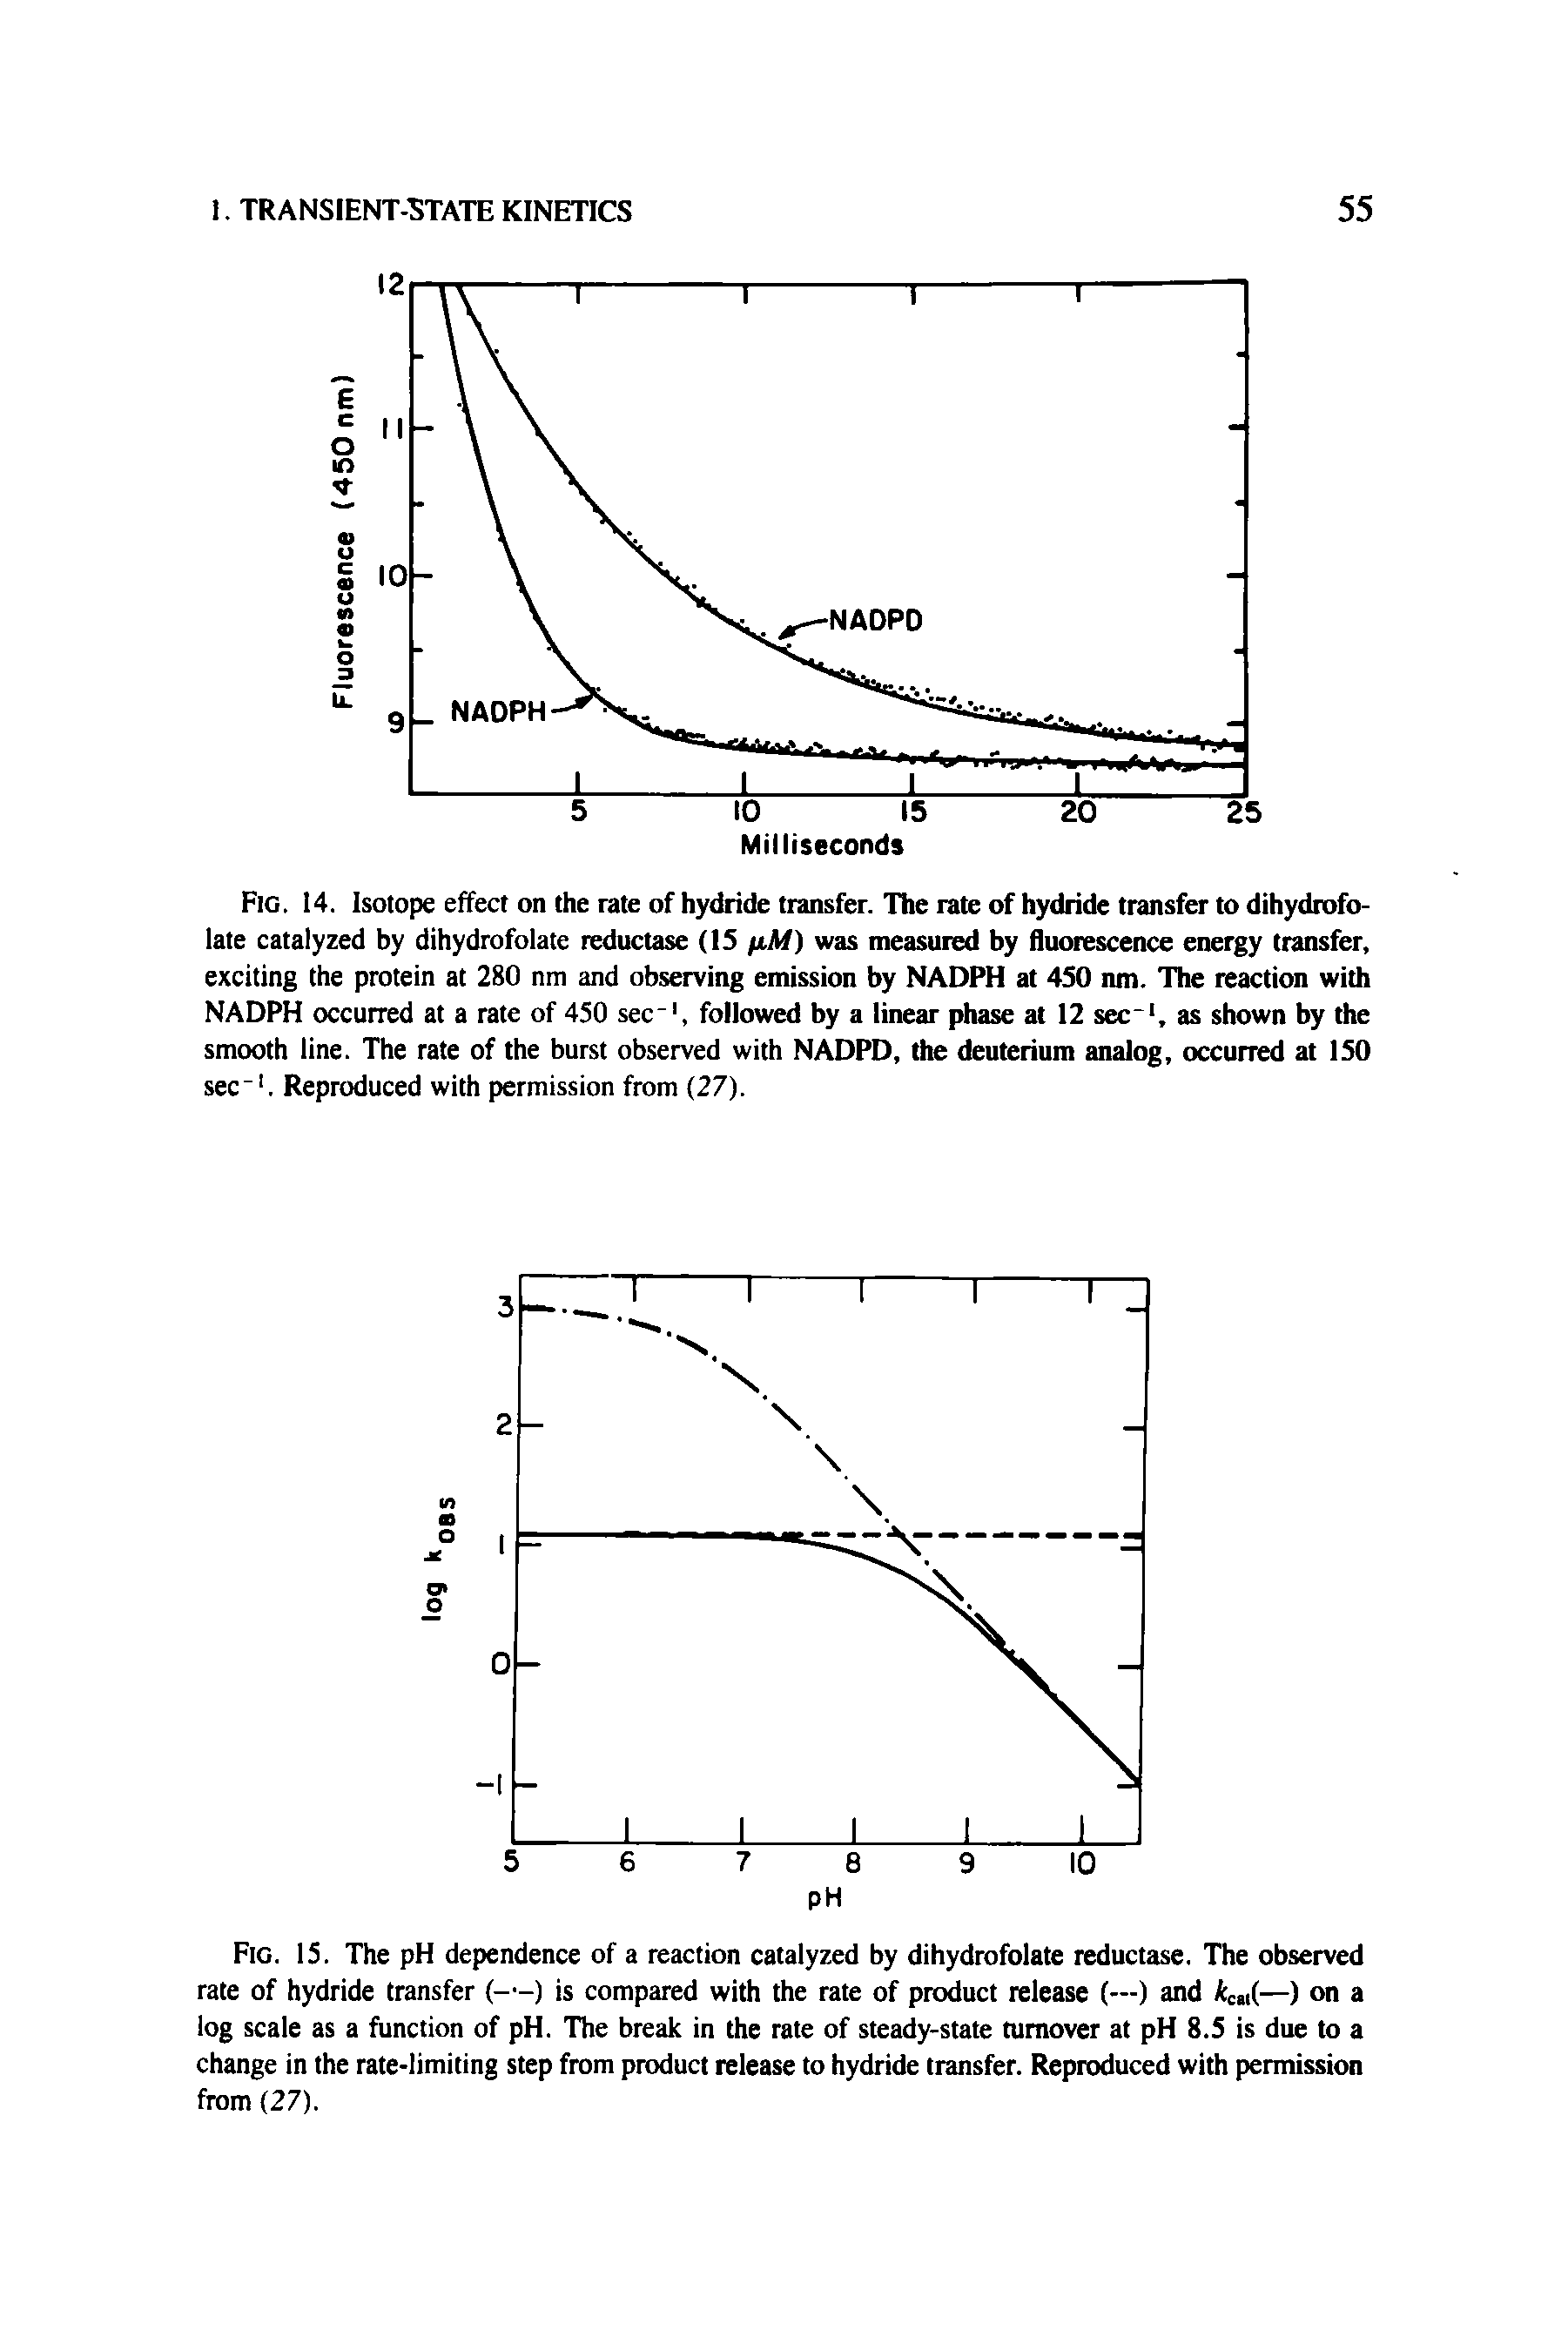 Fig. 14. Isotope effect on the rate of hydride transfer. The rate of hydride transfer to dihydrofolate catalyzed by dihydrofolate reductase (IS /rAf) was measured by fluorescence energy transfer, exciting the protein at 280 nm and observing emission by NADPH at 450 nm. The reaetion with NADPH oecurred at a rate of 450 see", followed by a linear phase at 12 sec , as shown by the smooth line. The rate of the burst observed with NADPD, the deuterium analog, occurred at 150 sec . Reproduced with permission from (27).